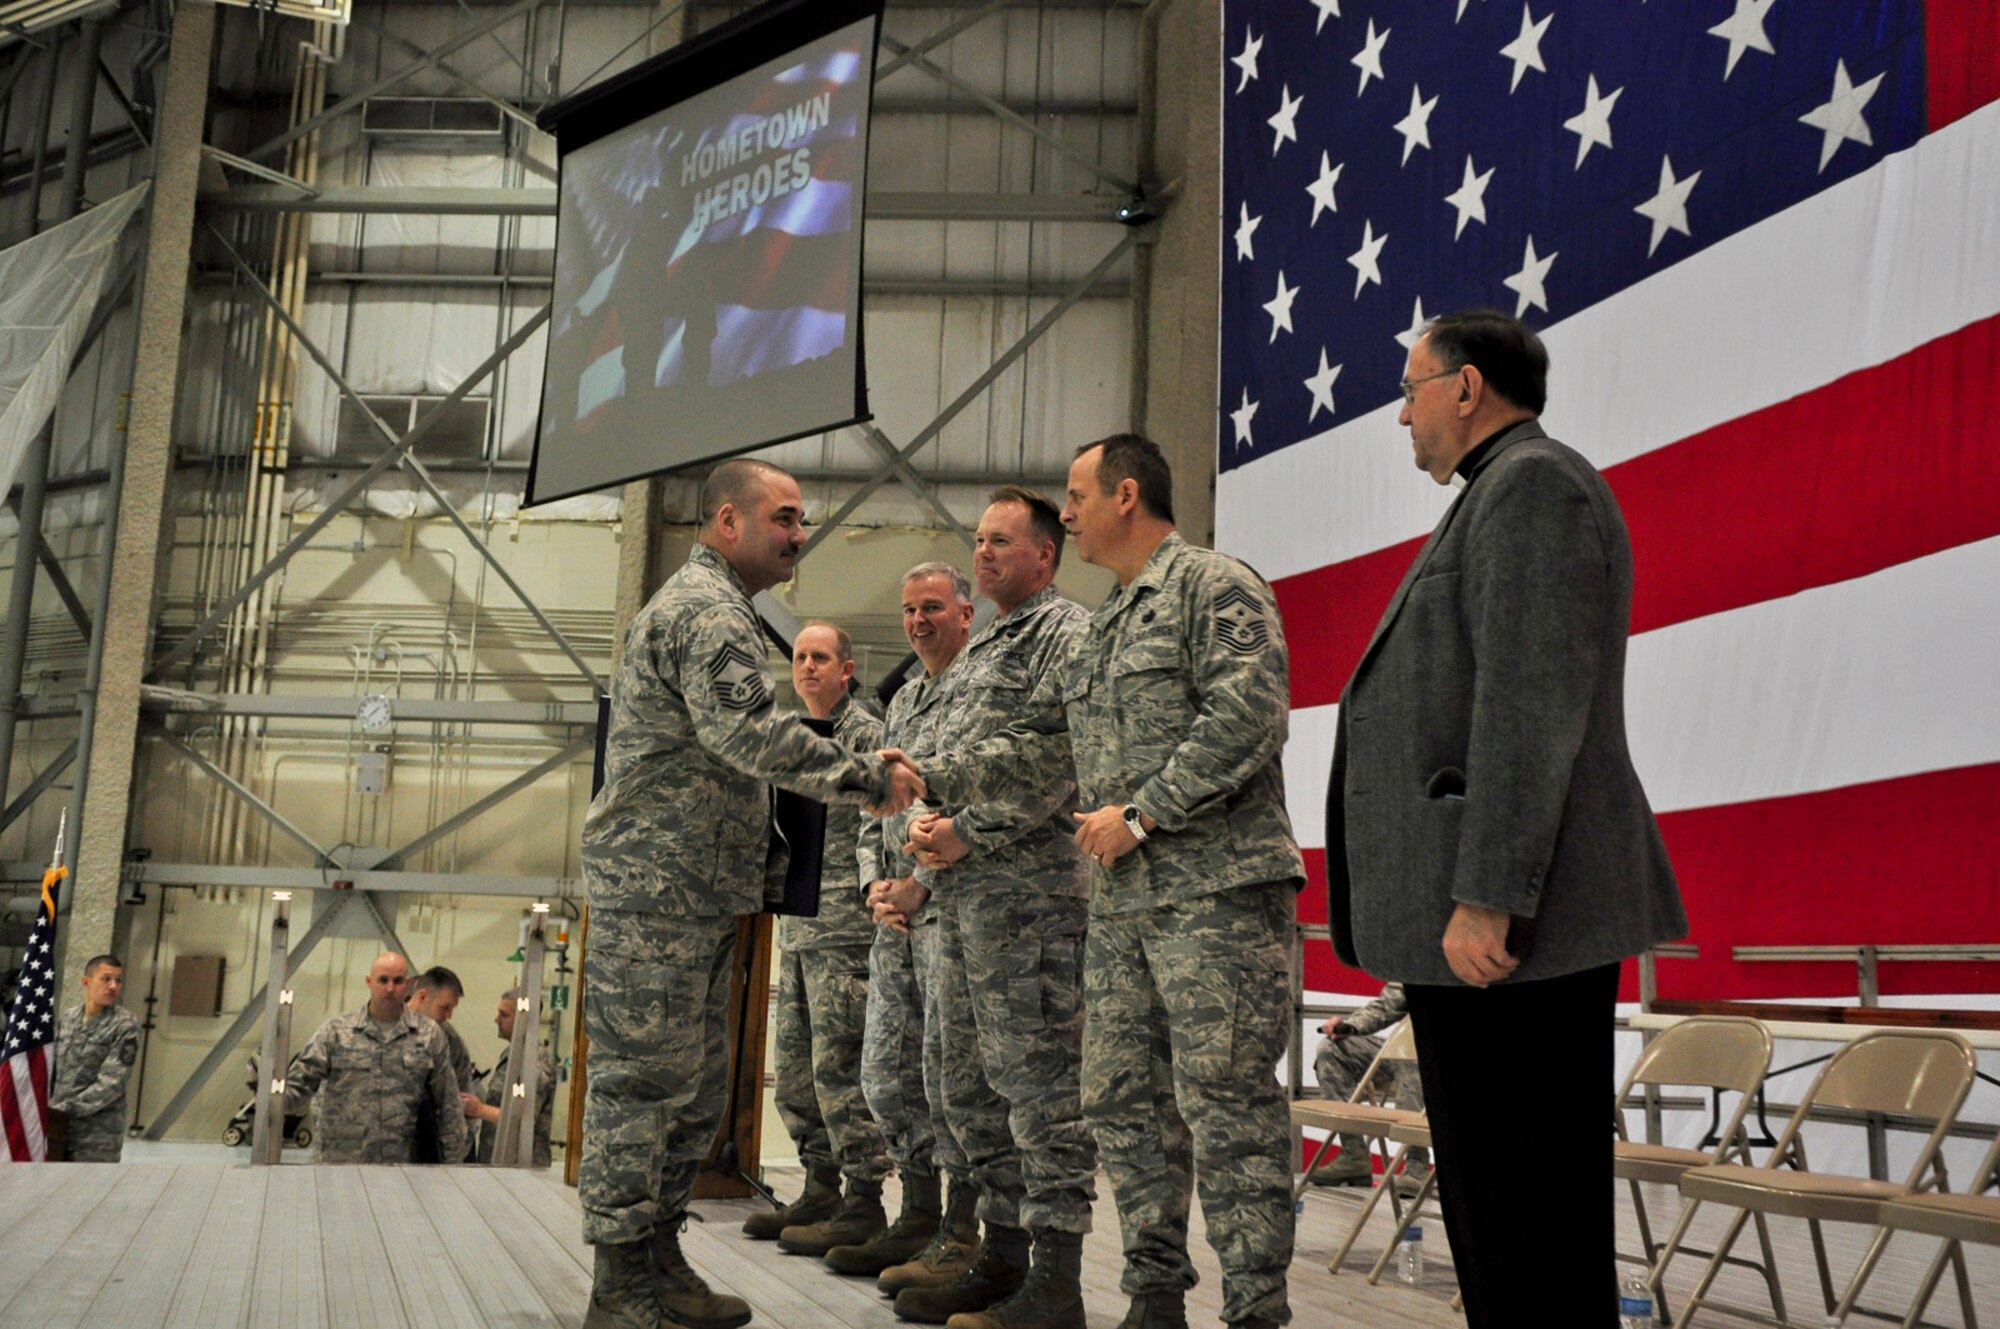 Chief Master Sgt. Christopher Chatham, 128th Air Refueling Wing maintenance squadron superintendent, shakes hands with Command Chief Master Sgt. Joe Parlato during a Hometown Heroes Salute Campaign award ceremony at the 128th Air Refueling Wing, Milwaukee, on Sunday, December 4, 2011.  Chatham received a wood-framed letter of appreciation signed by the director and the command chief master sergeant of the Air National Guard for his duty while deployed overseas.  The Hometown Heroes Salute Campaign is an Air National Guard event that recognizes Airmen who have deployed overseas for more than 30 days.  Air National Guard photo by Tech. Sgt. Tom Sobczyk.